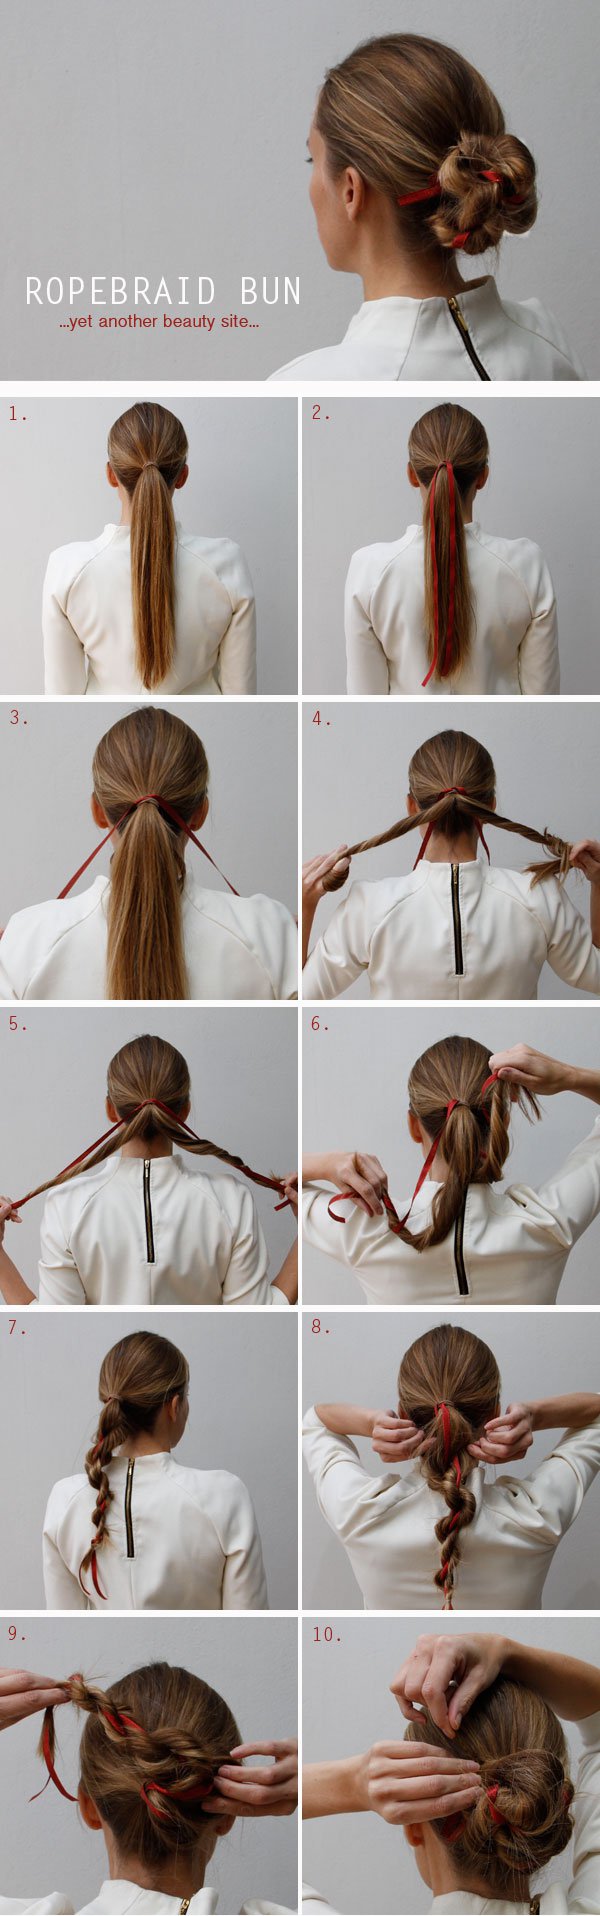 15 Quick And Easy Everyday Hairstyle Ideas